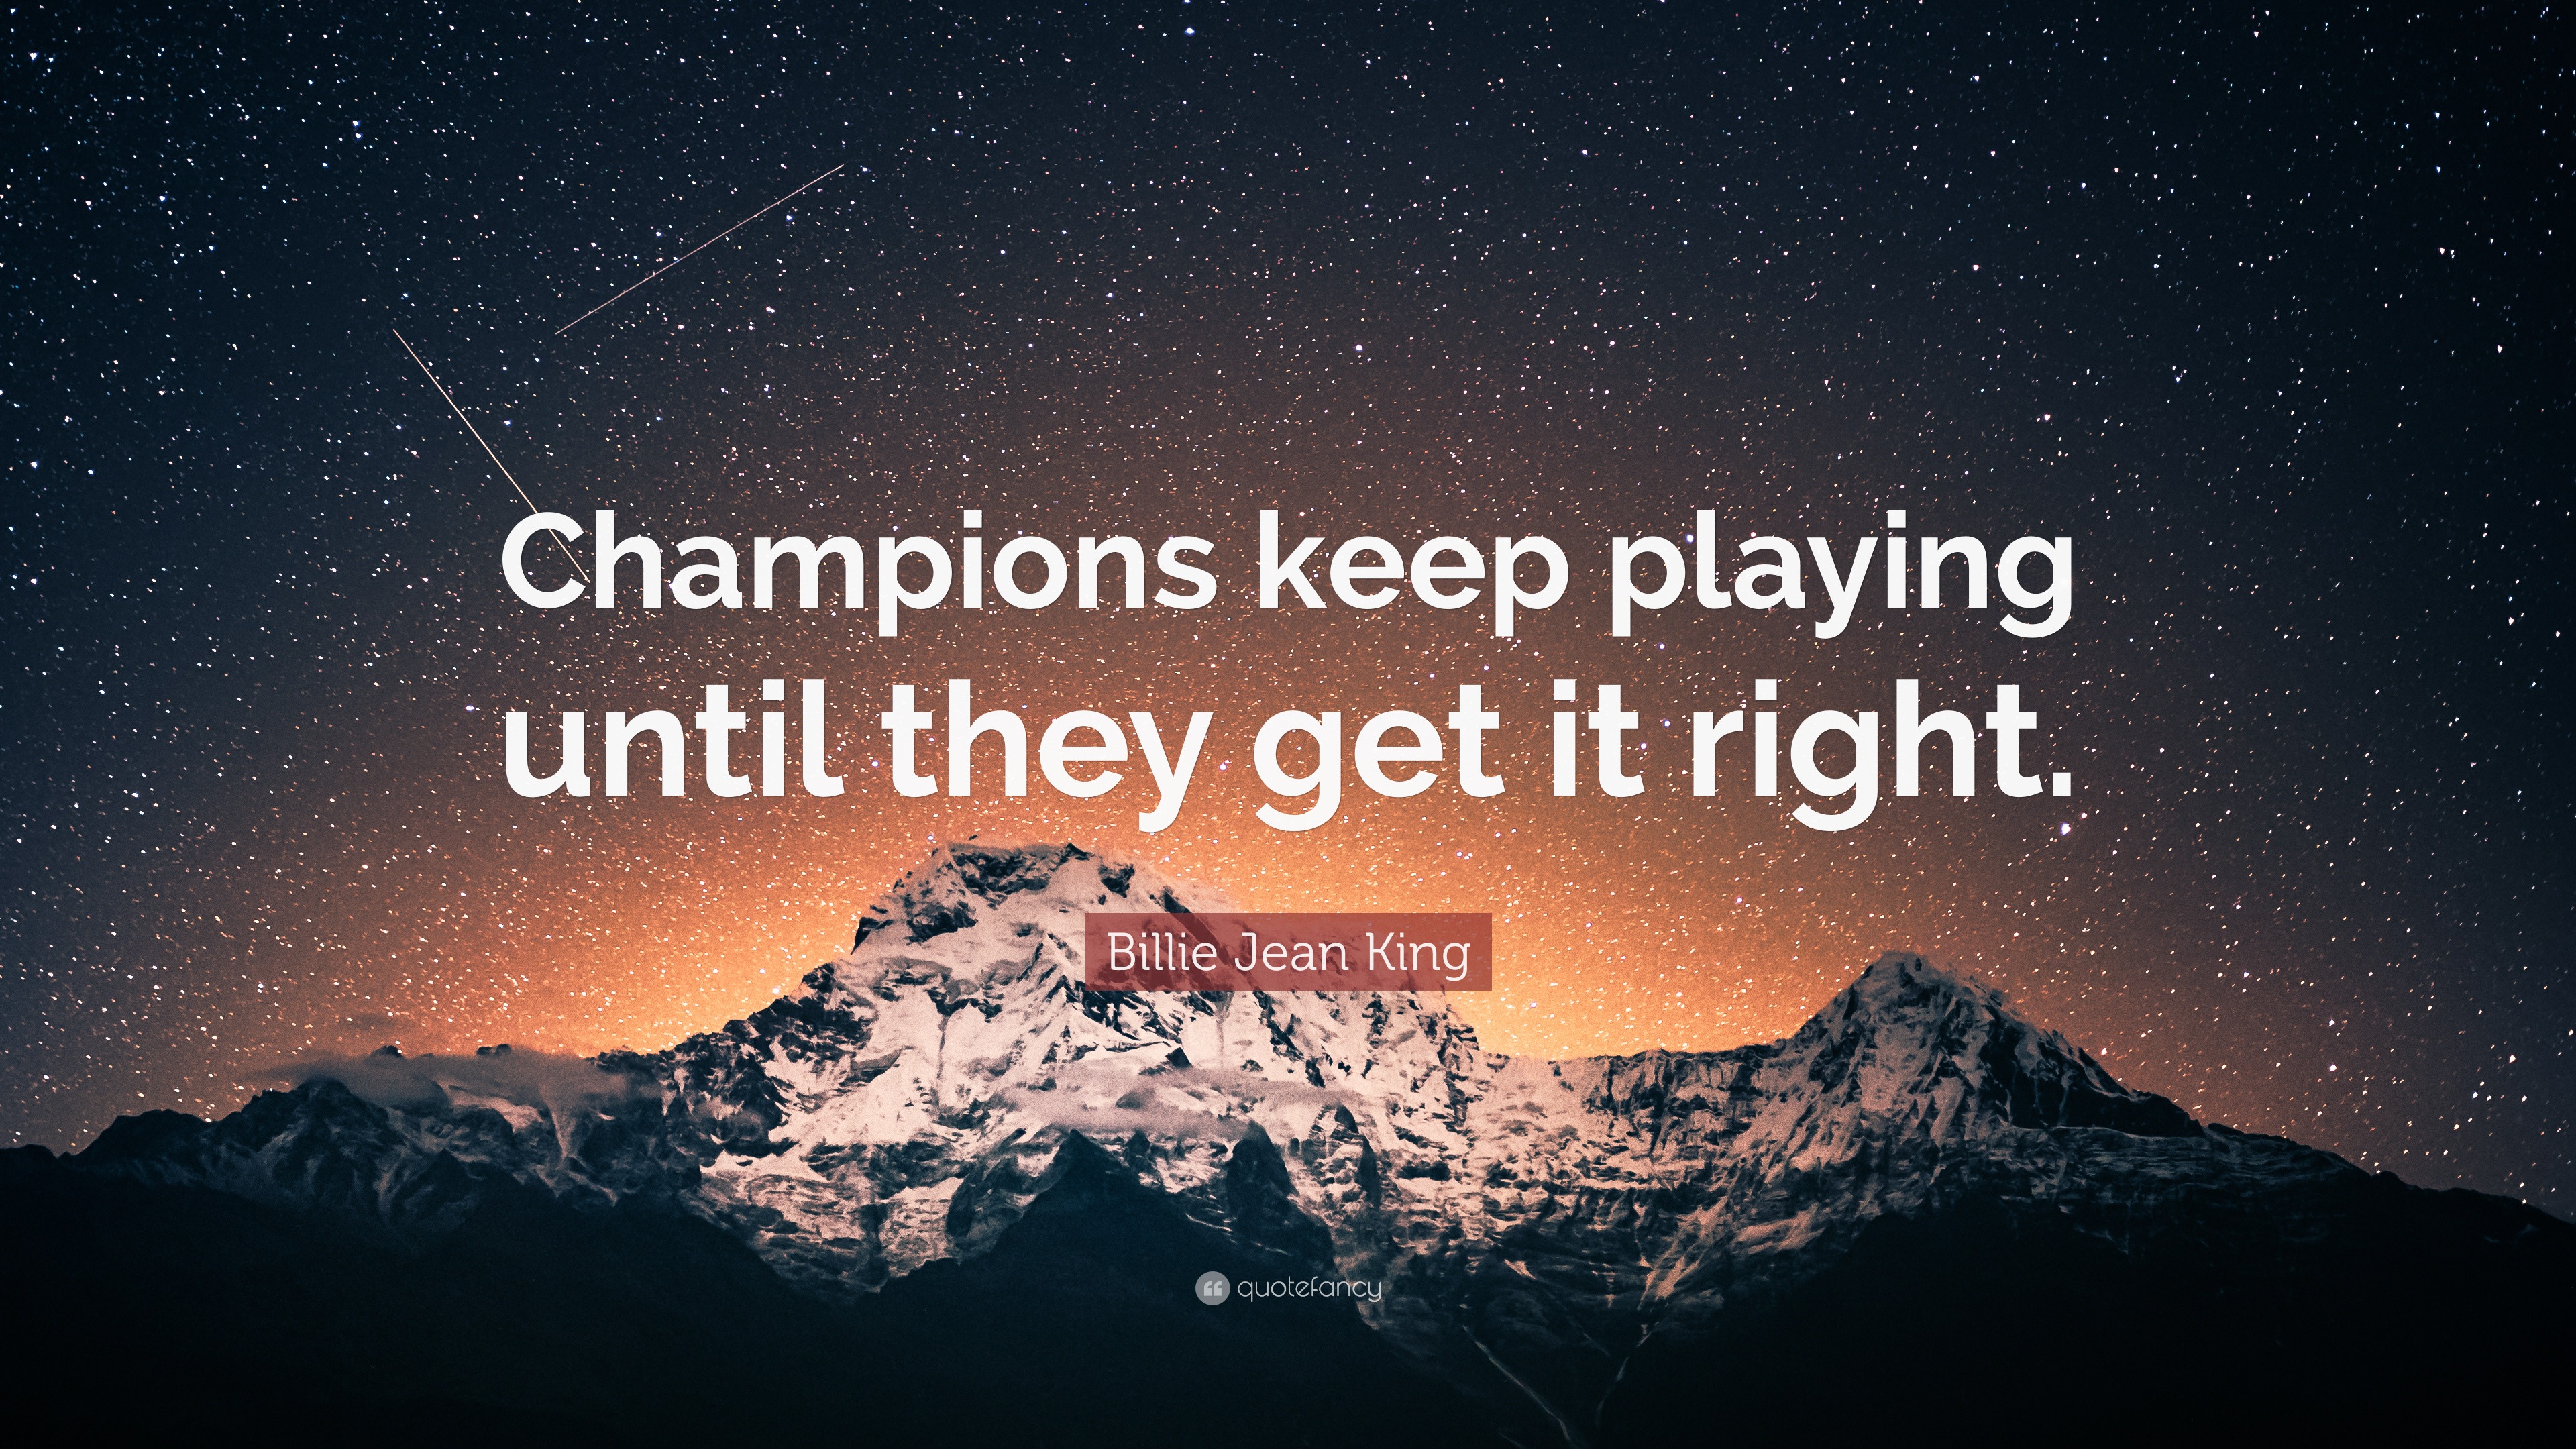 Billie Jean King Quote: “Champions keep playing until they get it right.”